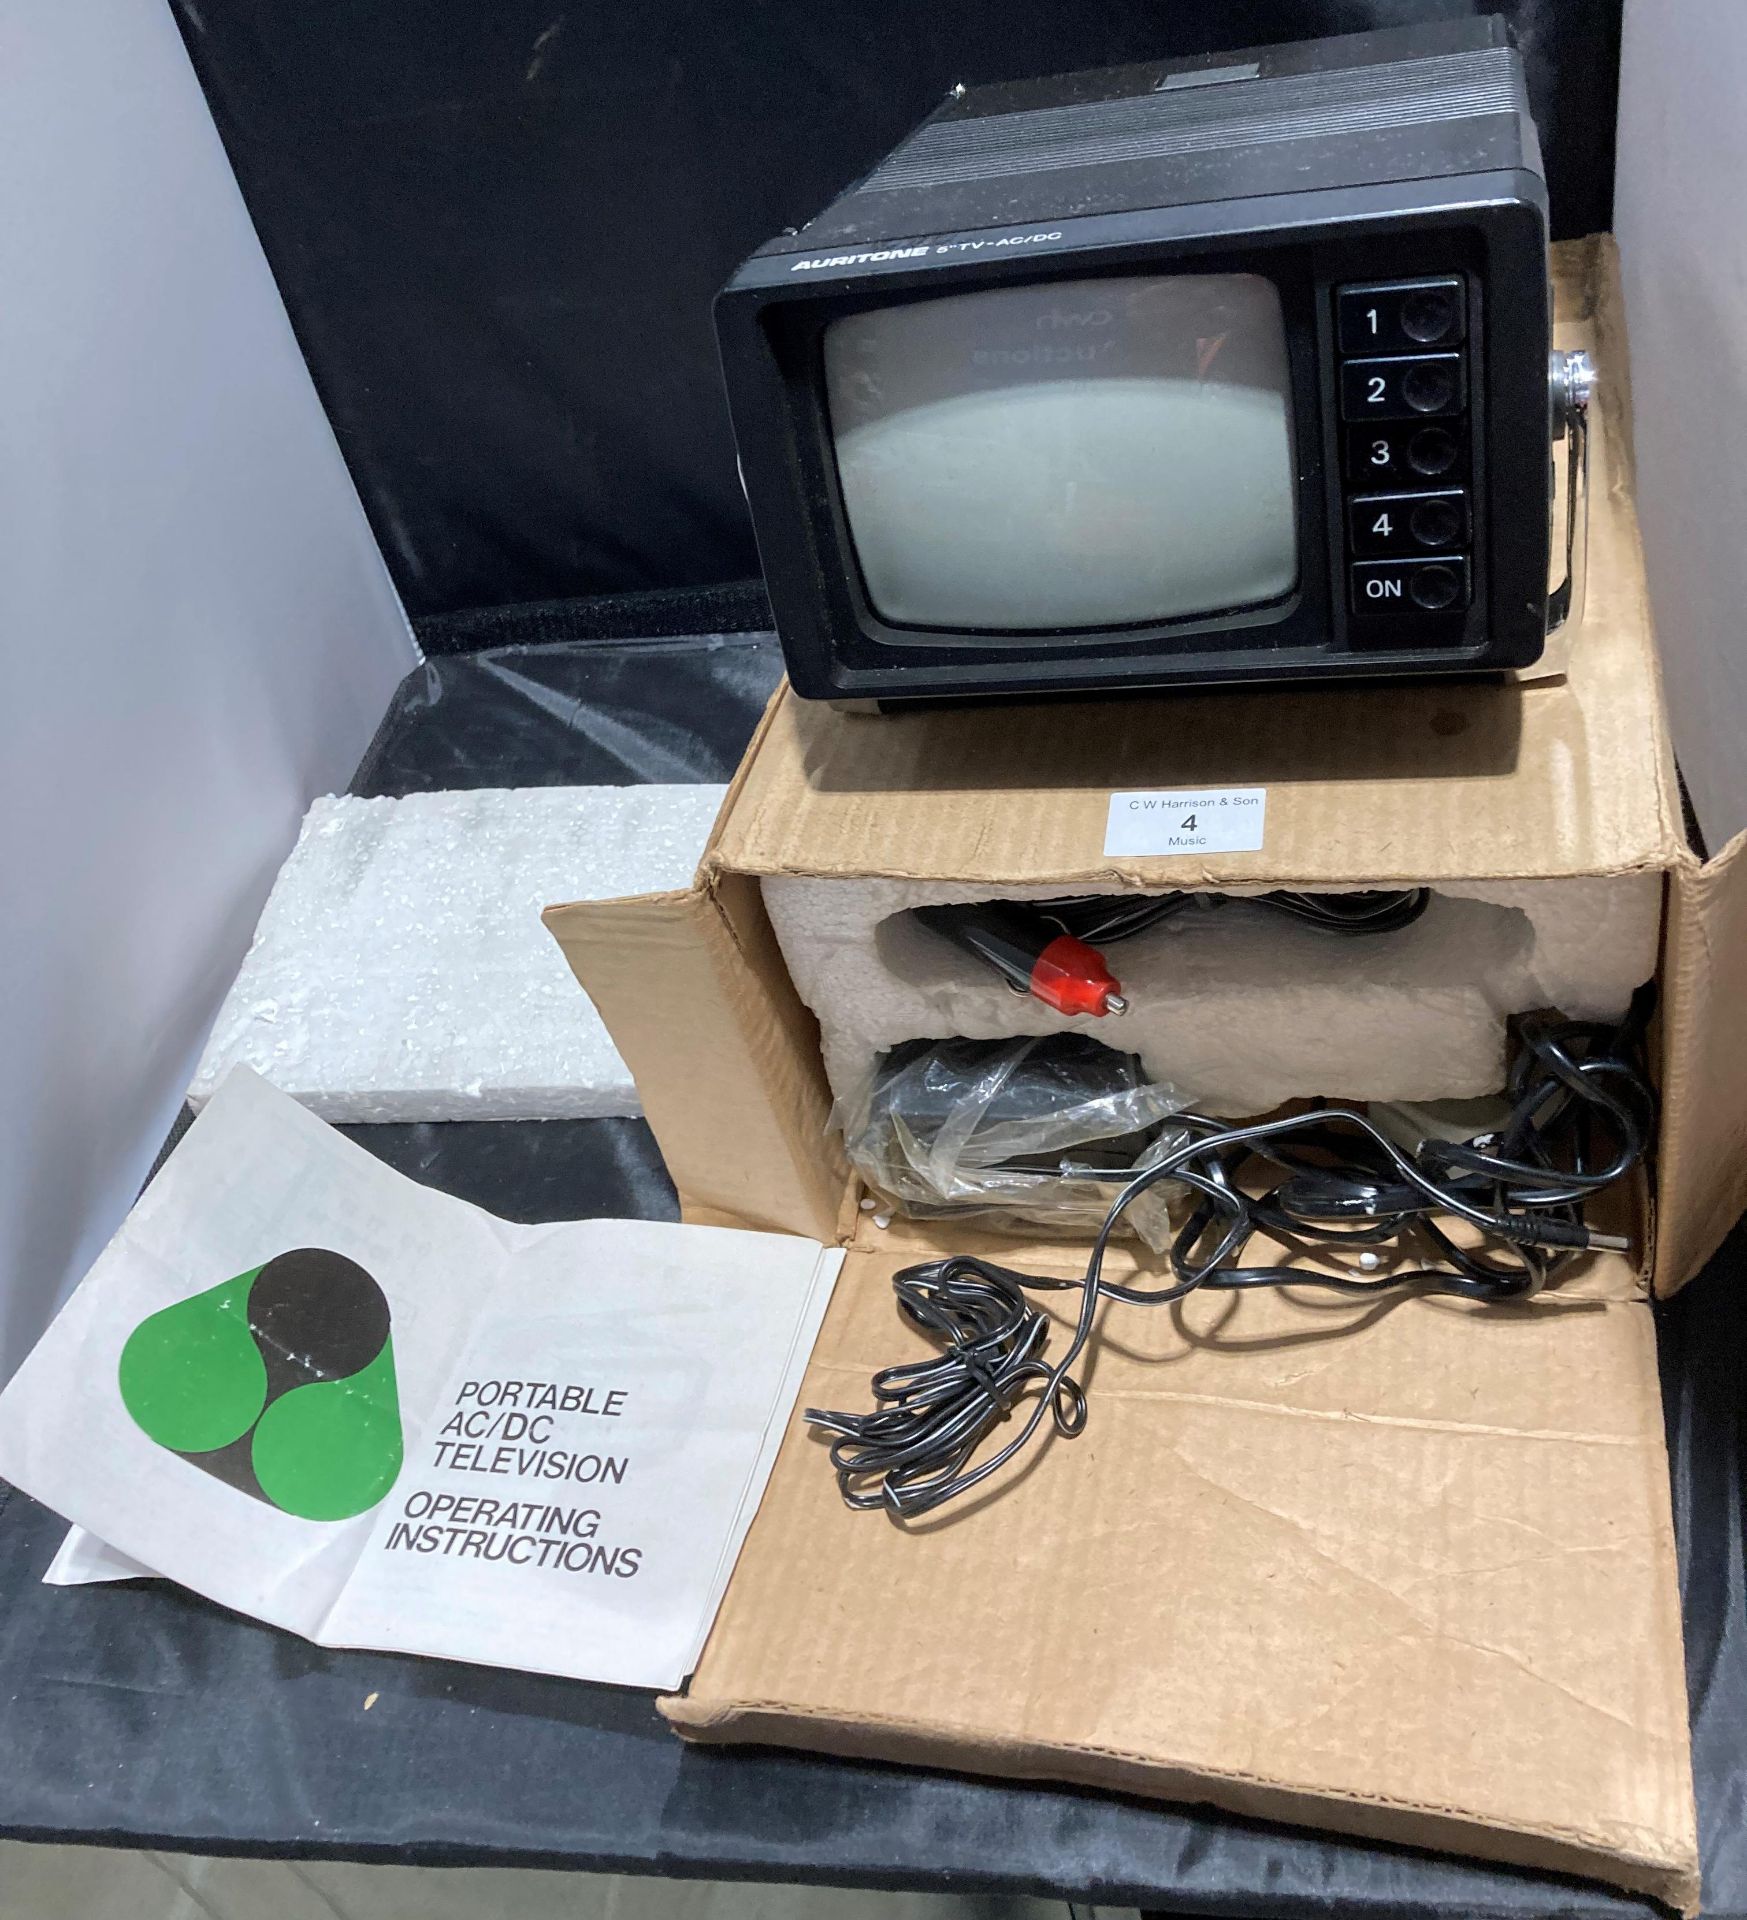 An Auritone 5" AC/DC portable television with cables and manual (no test)